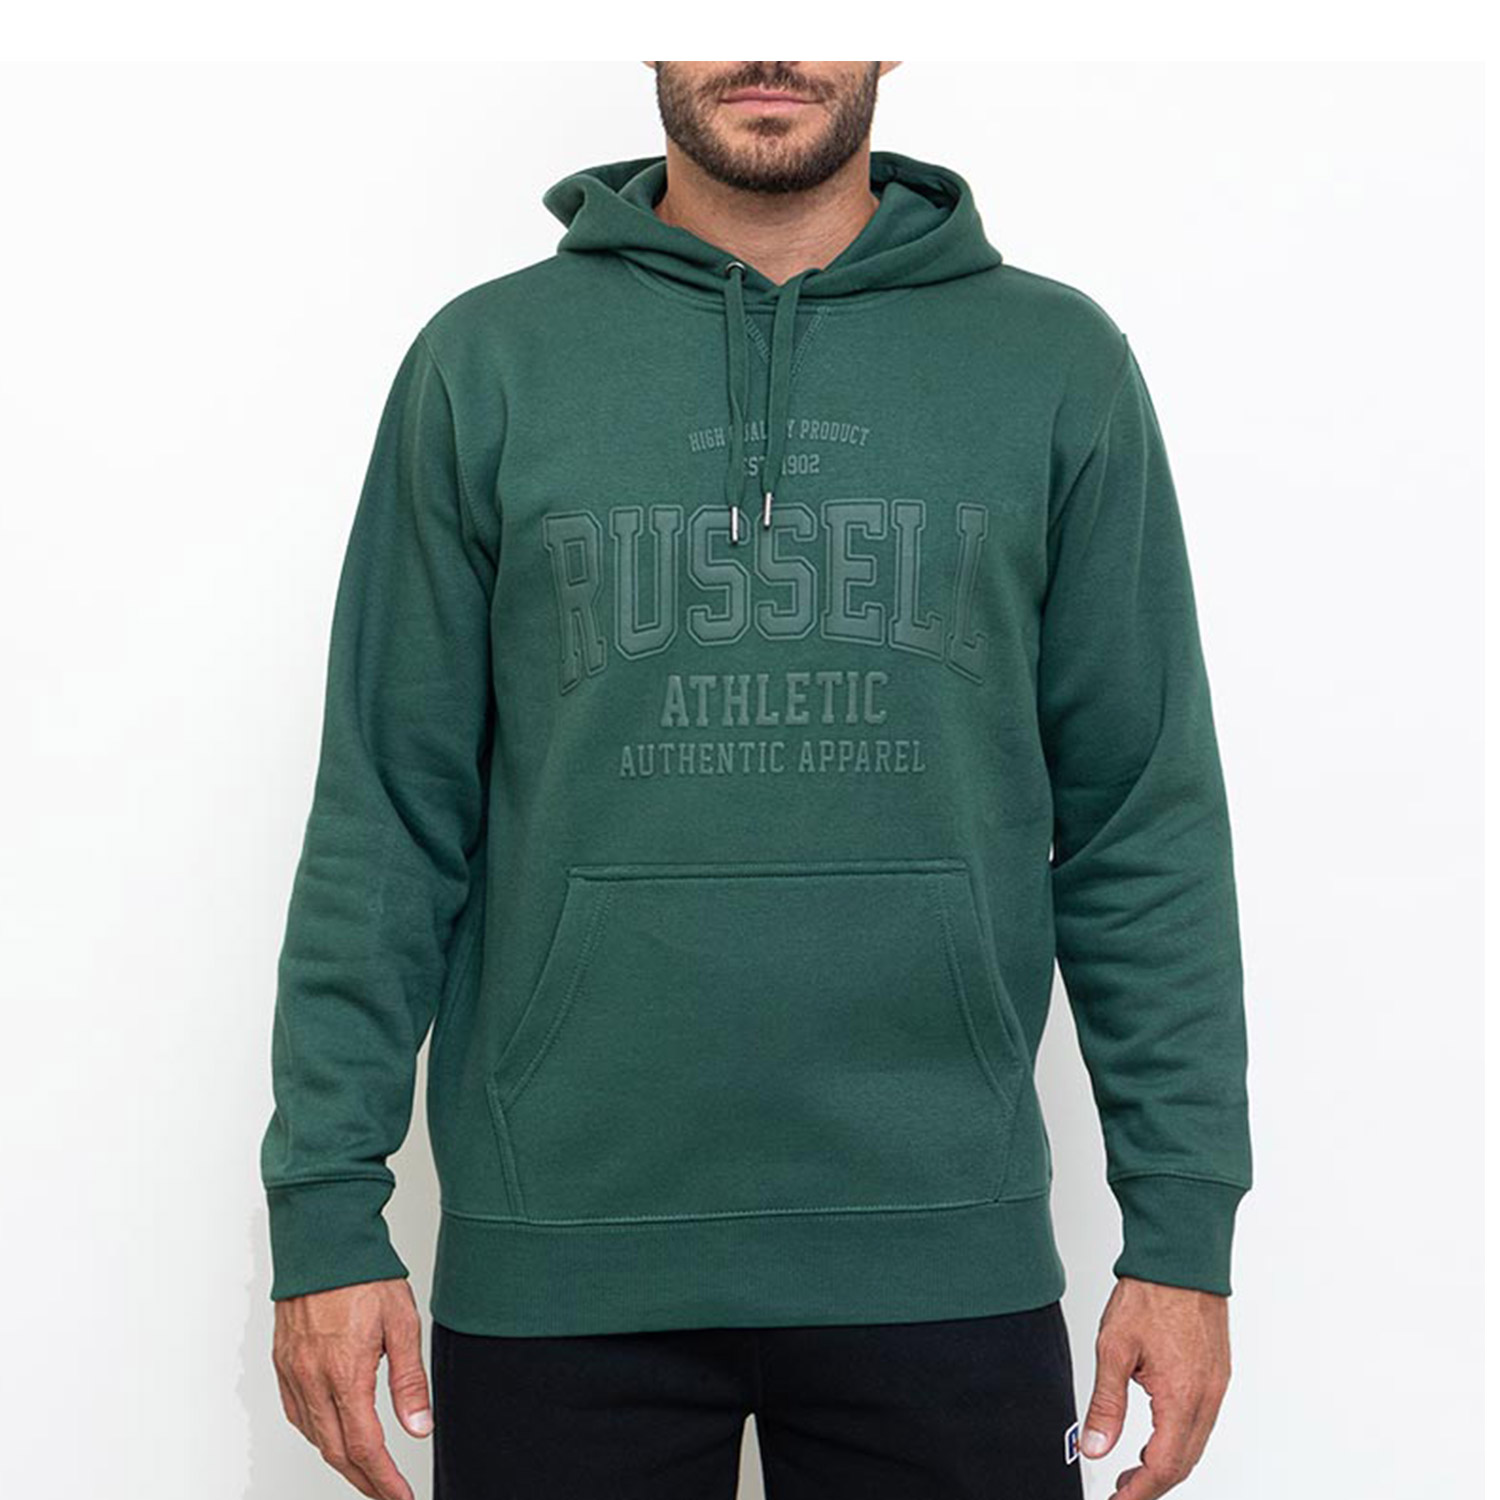 Russell M Pull Over Hoody Dark Green (A3-014-2-DG1-225)